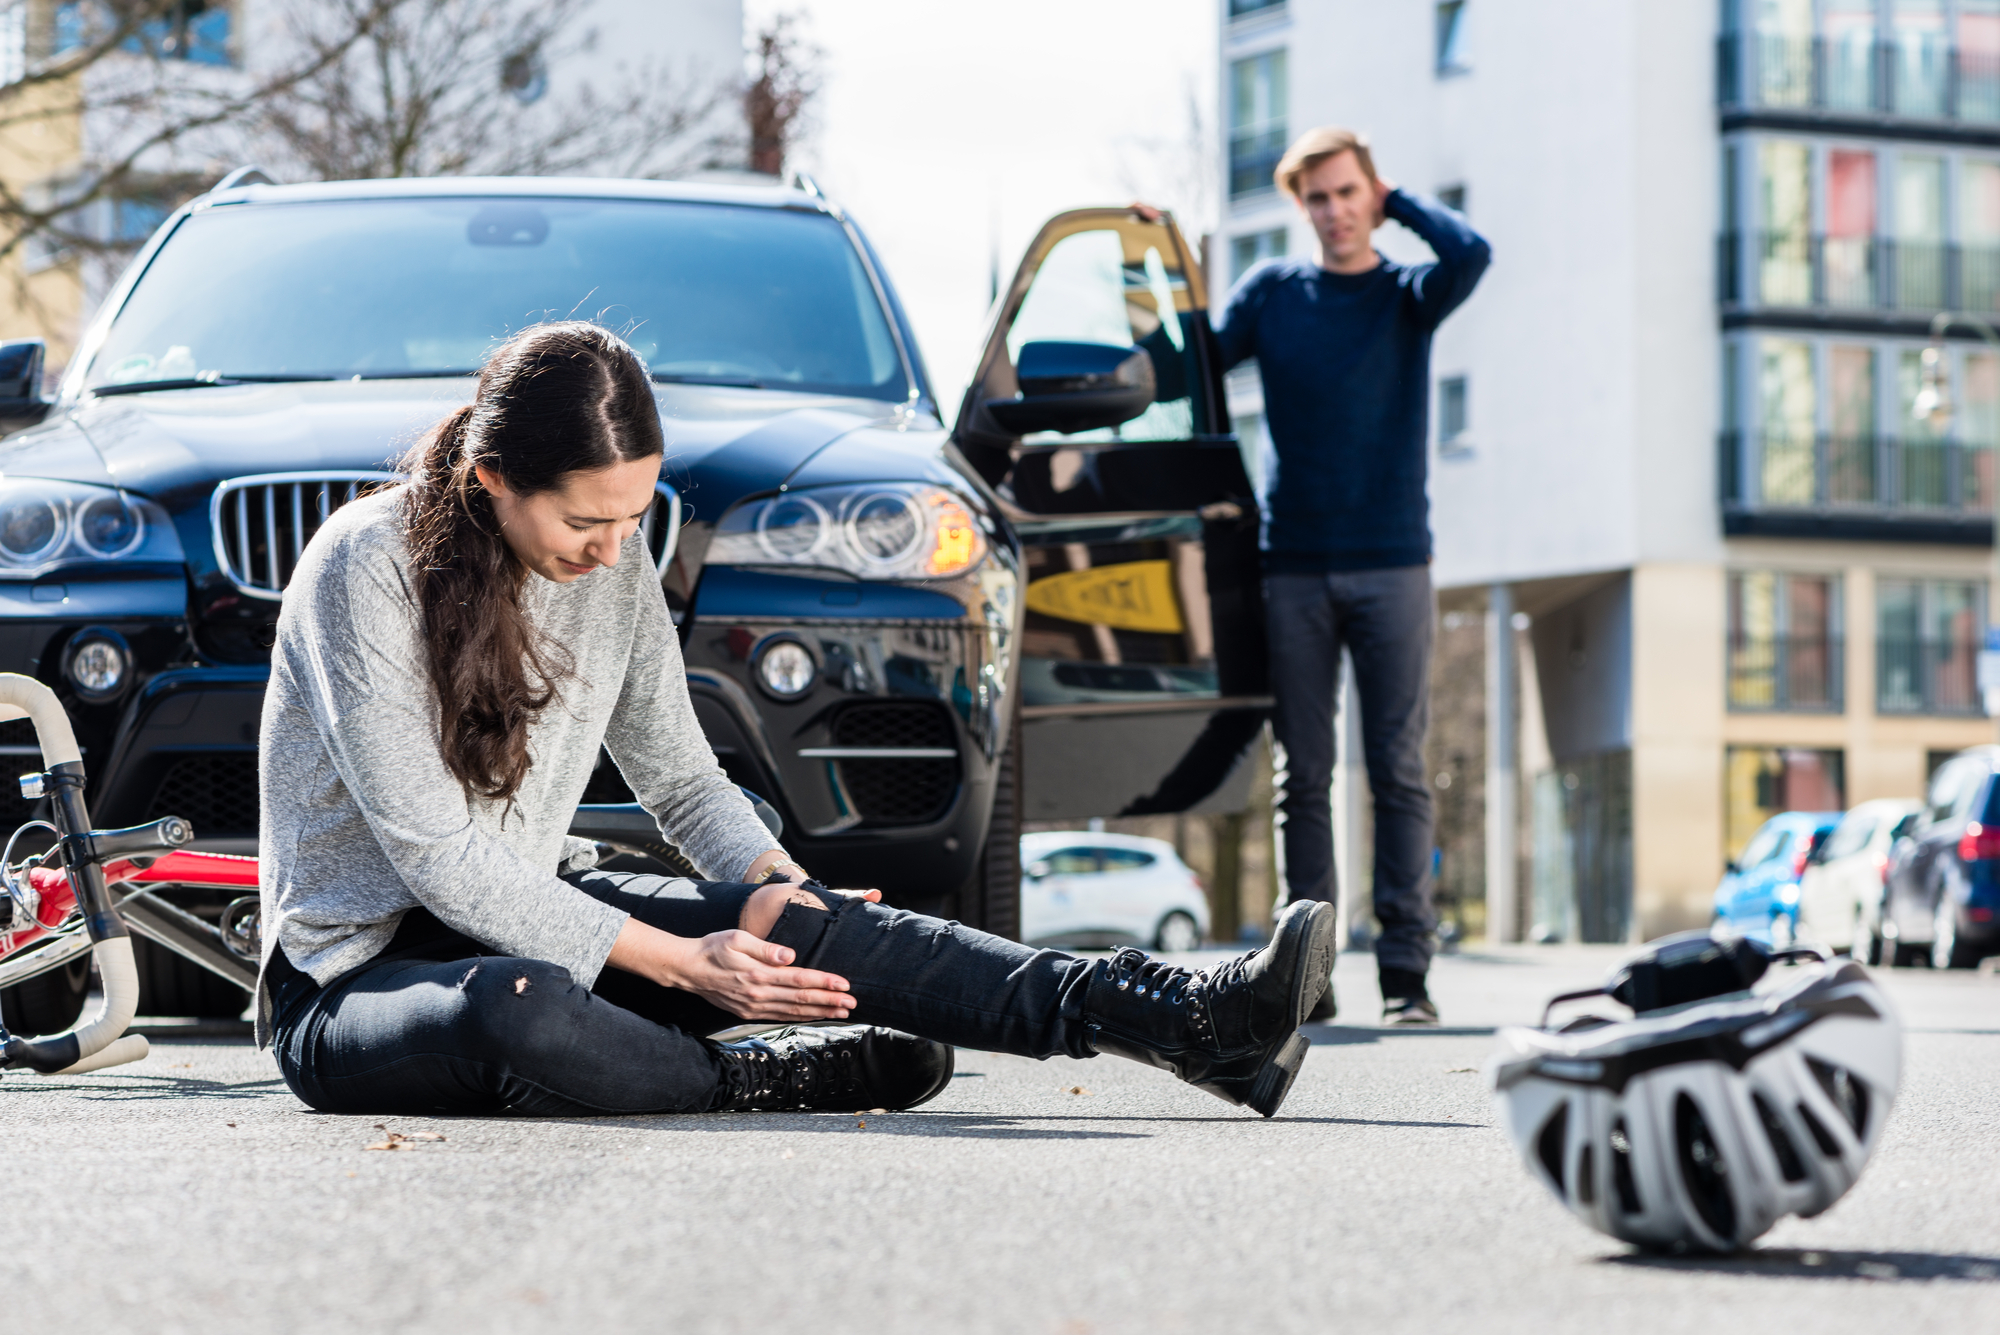 What To Do After a Bike Accident - Full length of a young female bicyclist fallen down on street with serious injuries after traffic accident with the 4x4 car of a young man